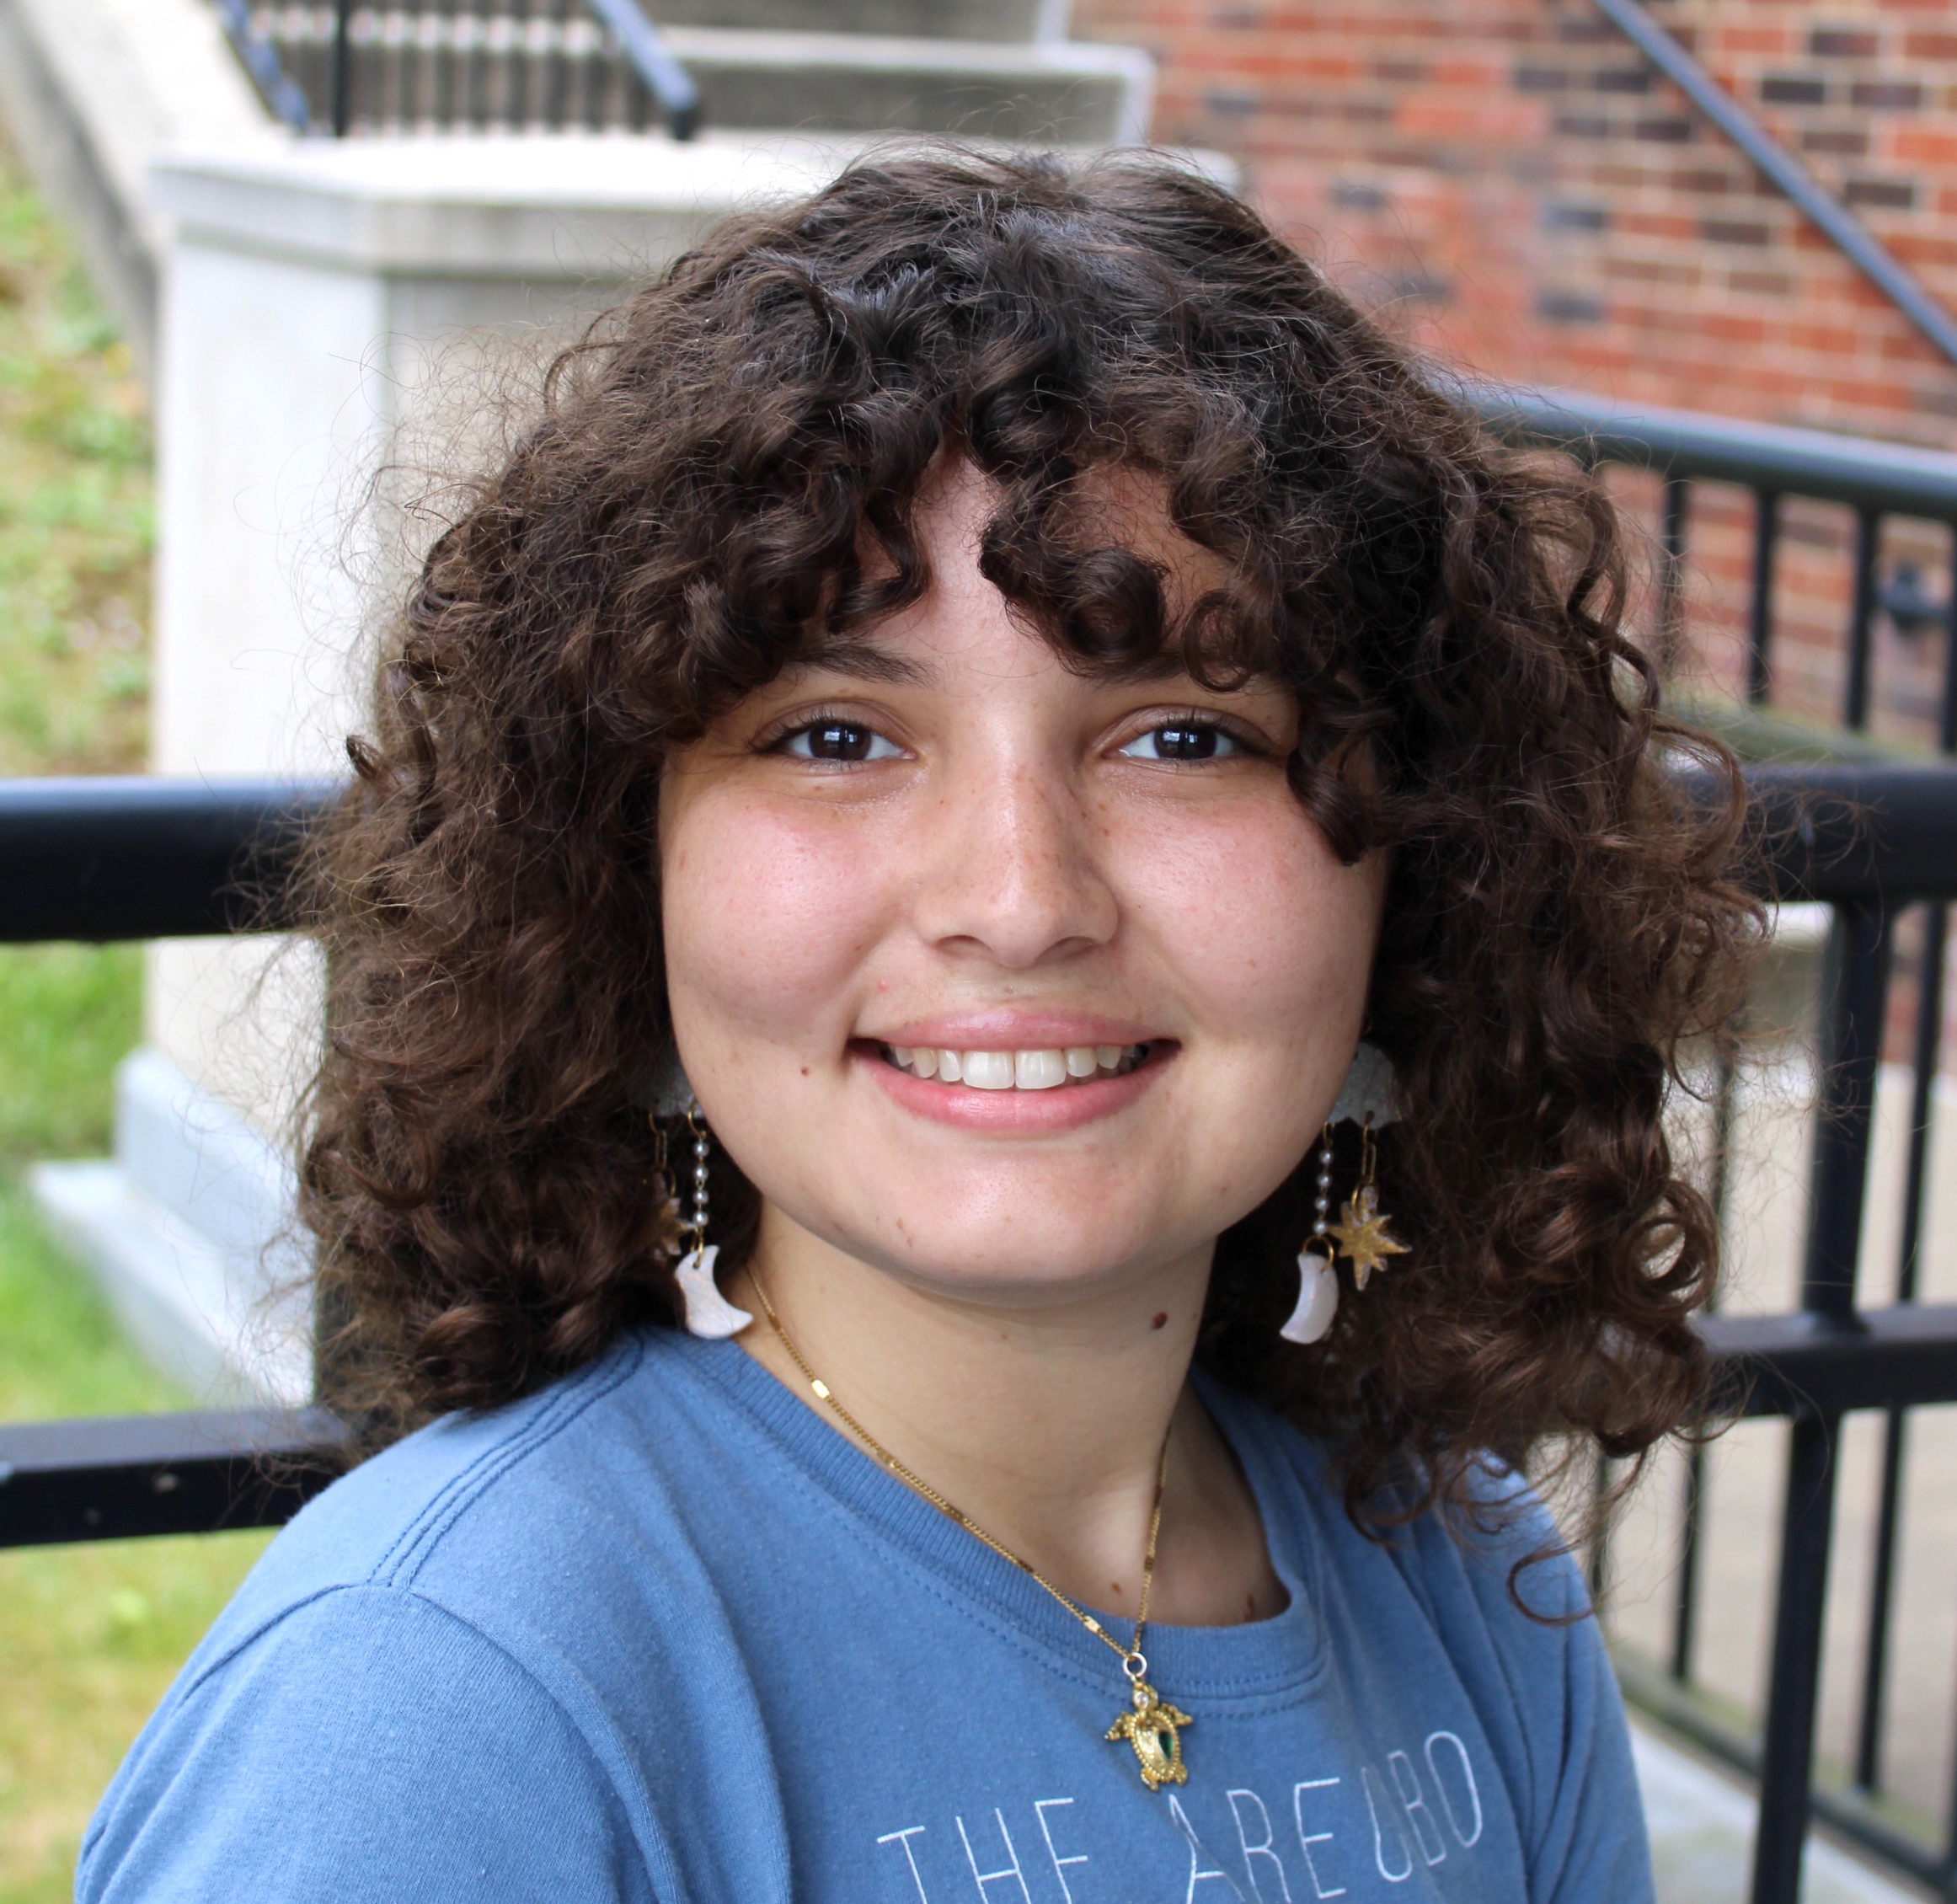 Smiling young woman with chin length curly brown hair and dark brown eyes wearing moon and star earrings and a blue tshirt.